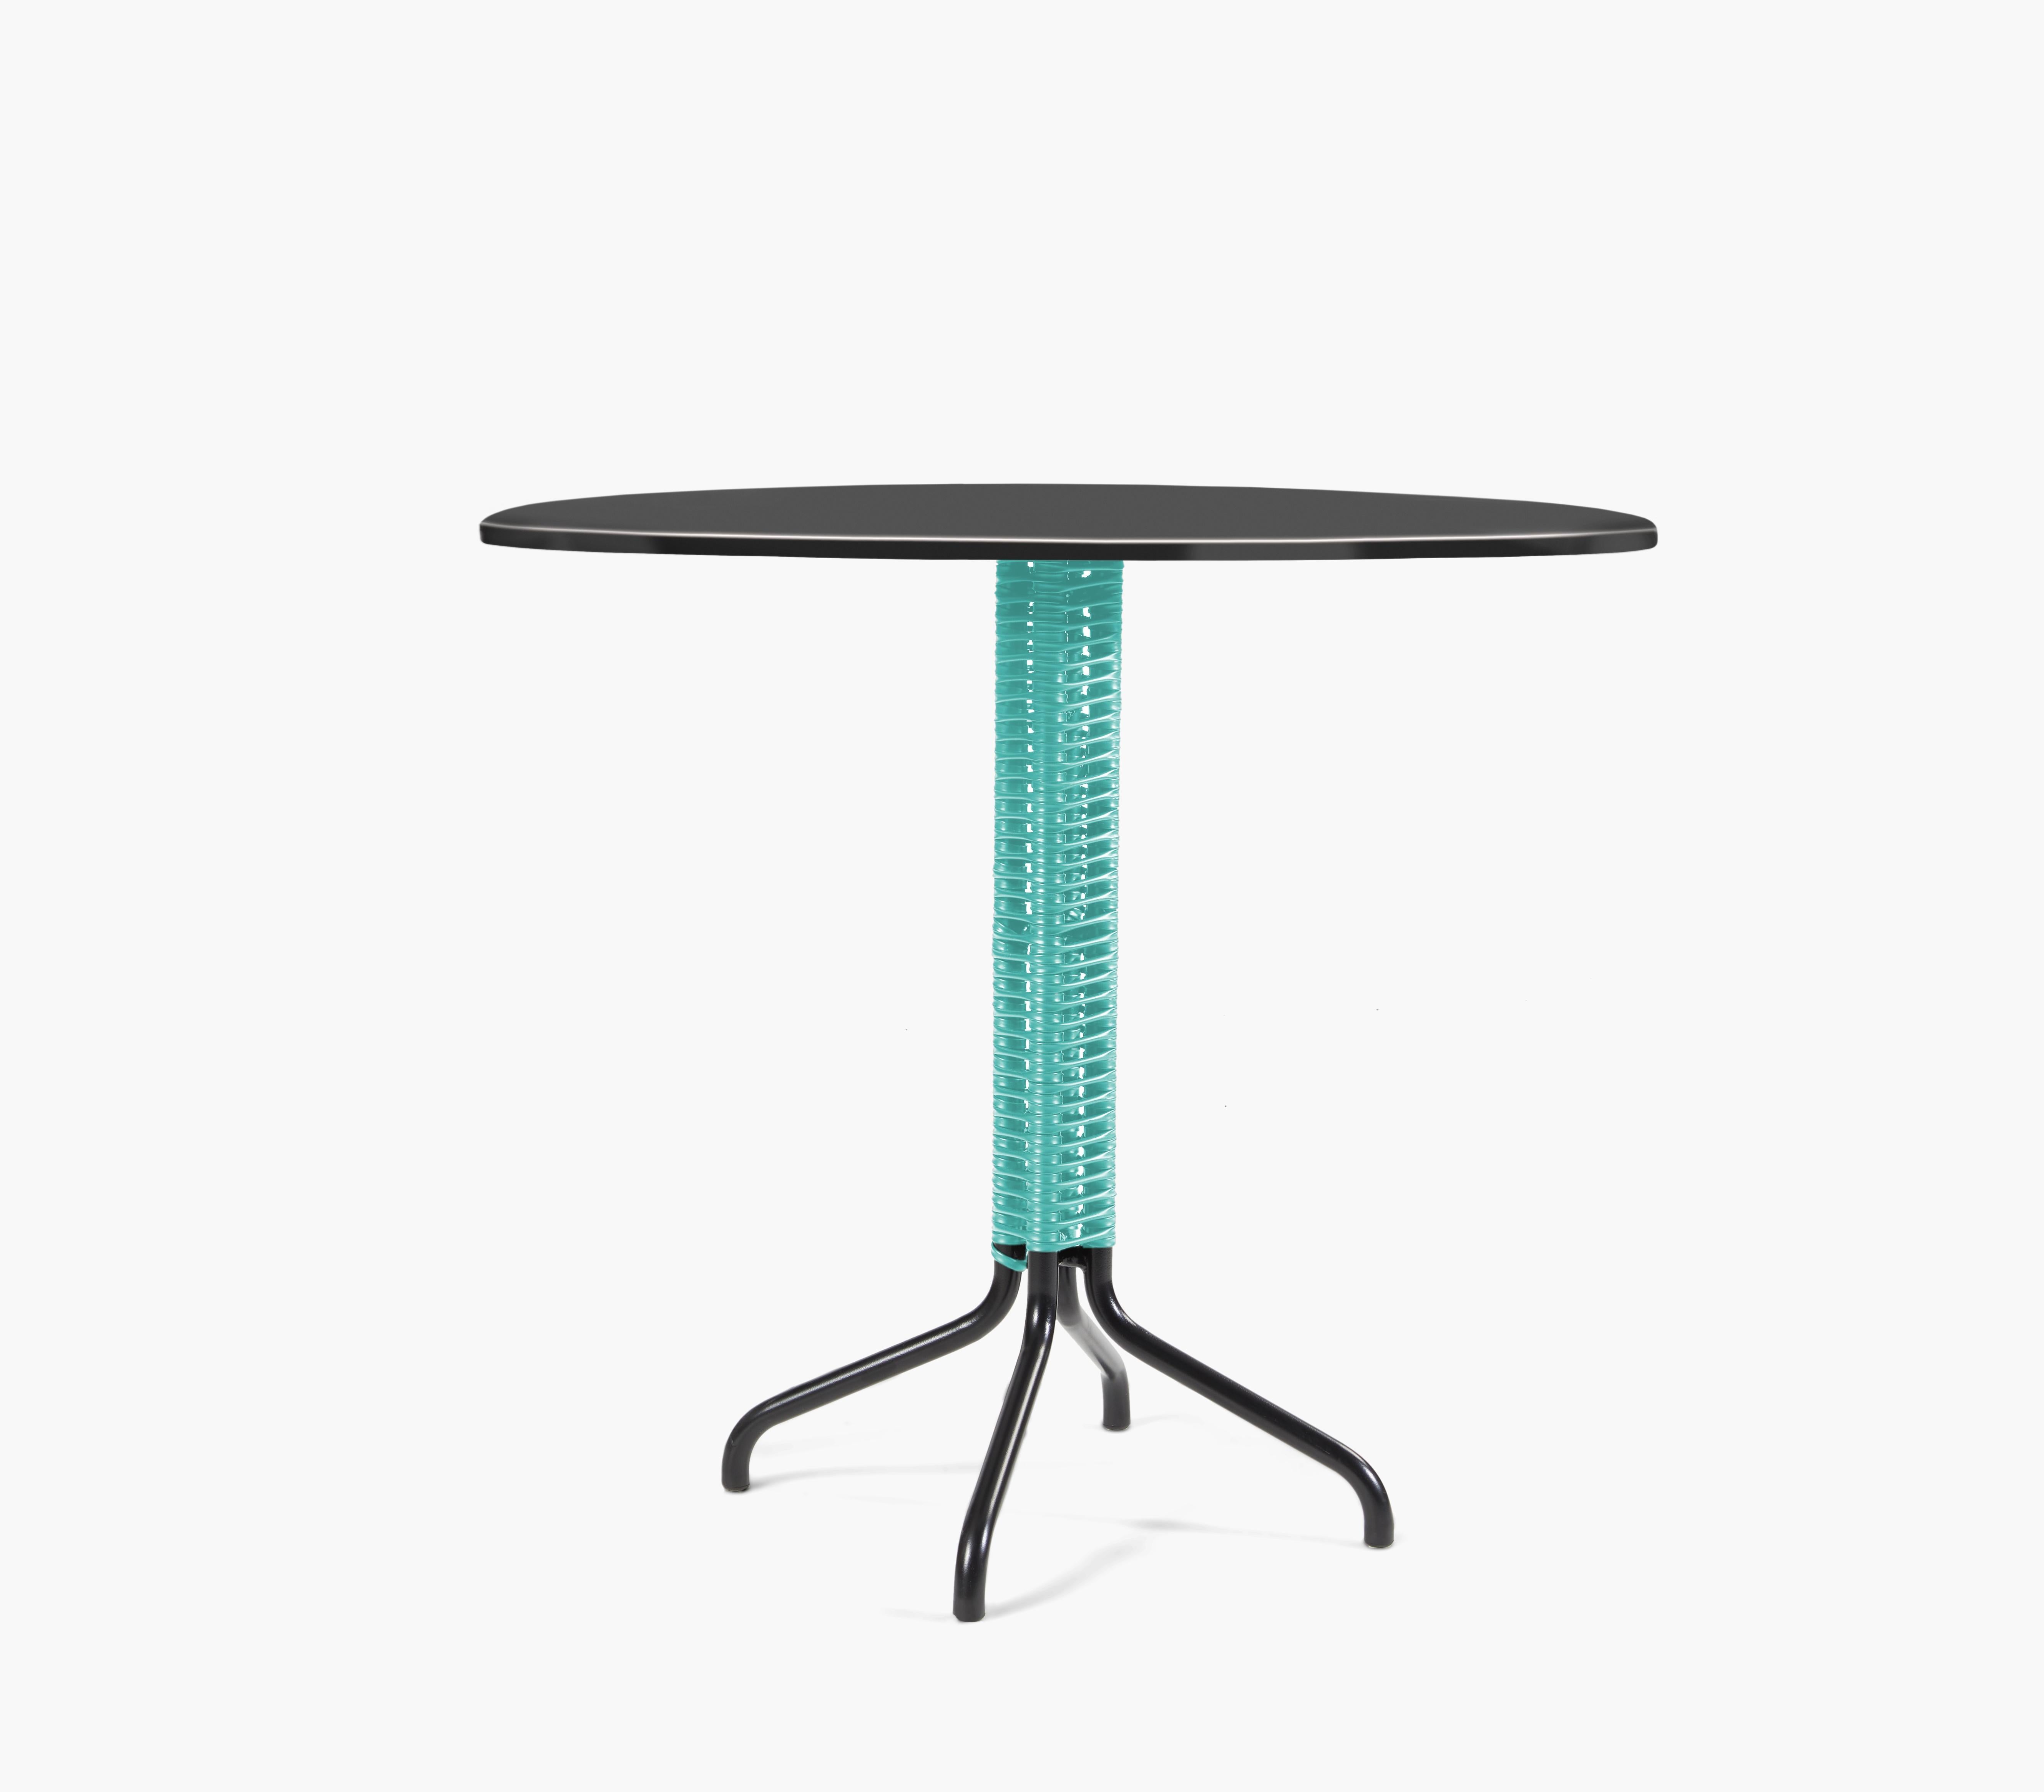 Cielo Bistro table by Sebastian Herkner
Dimensions: 60 x 73 x 60 cm
Materials: Steel

The popular cielo collection of chairs, loungers and lounge chairs - designed by Sebastian Herkner - is once again expanding: the elegant bistro table stands